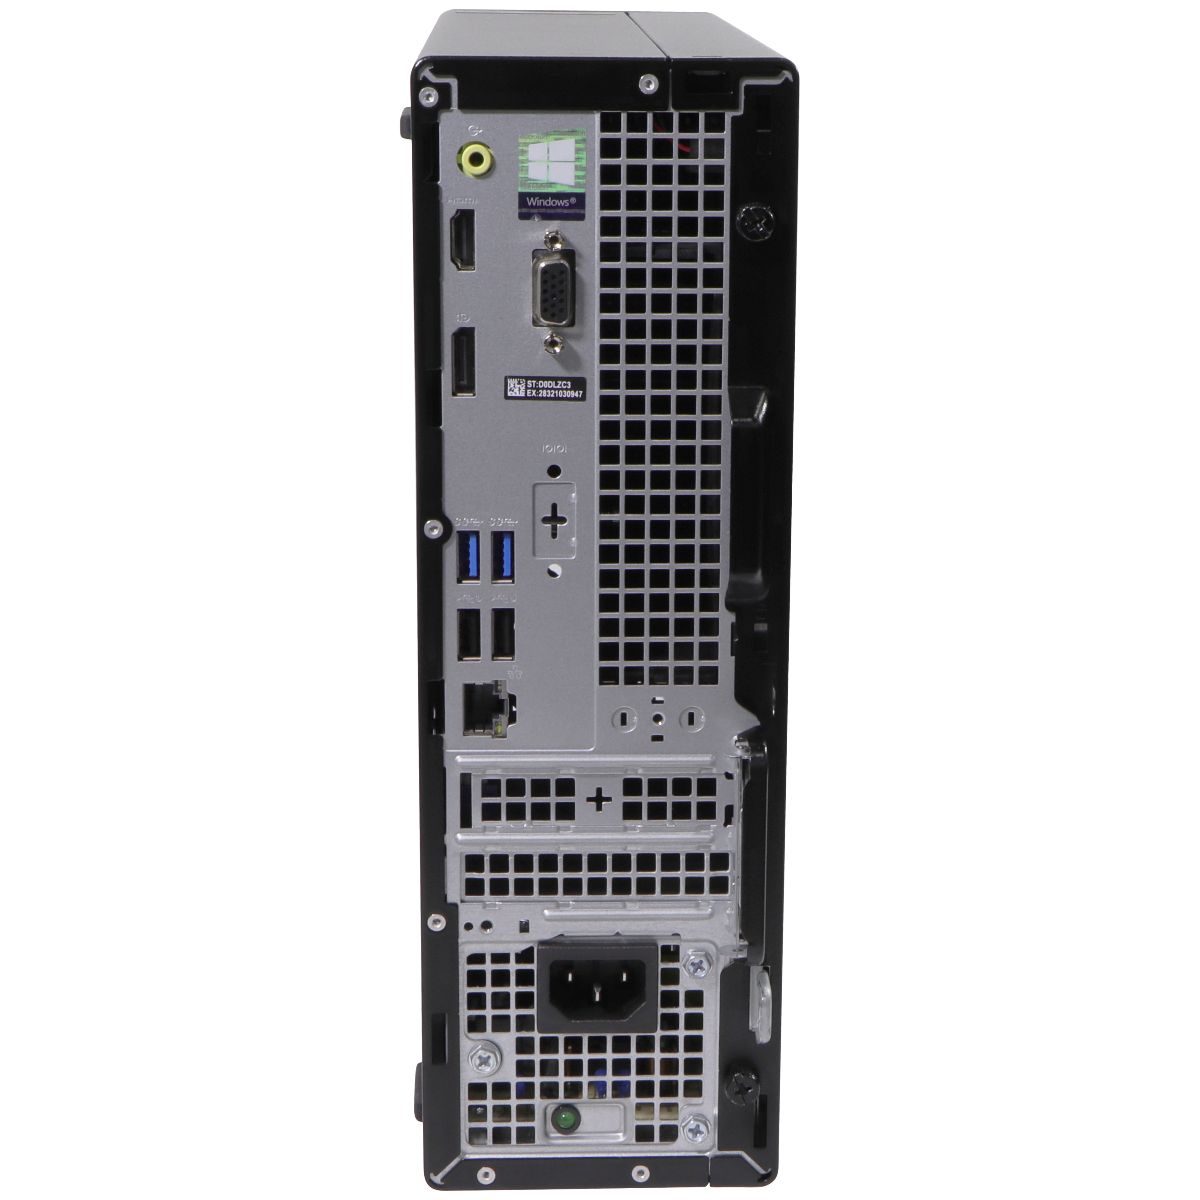 Dell OptiPlex 3080 Tower PC (D15S0002) Intel i5-10500/500GB HDD/8GB/Win 10 Home PC Desktops & All-In-Ones Dell    - Simple Cell Bulk Wholesale Pricing - USA Seller